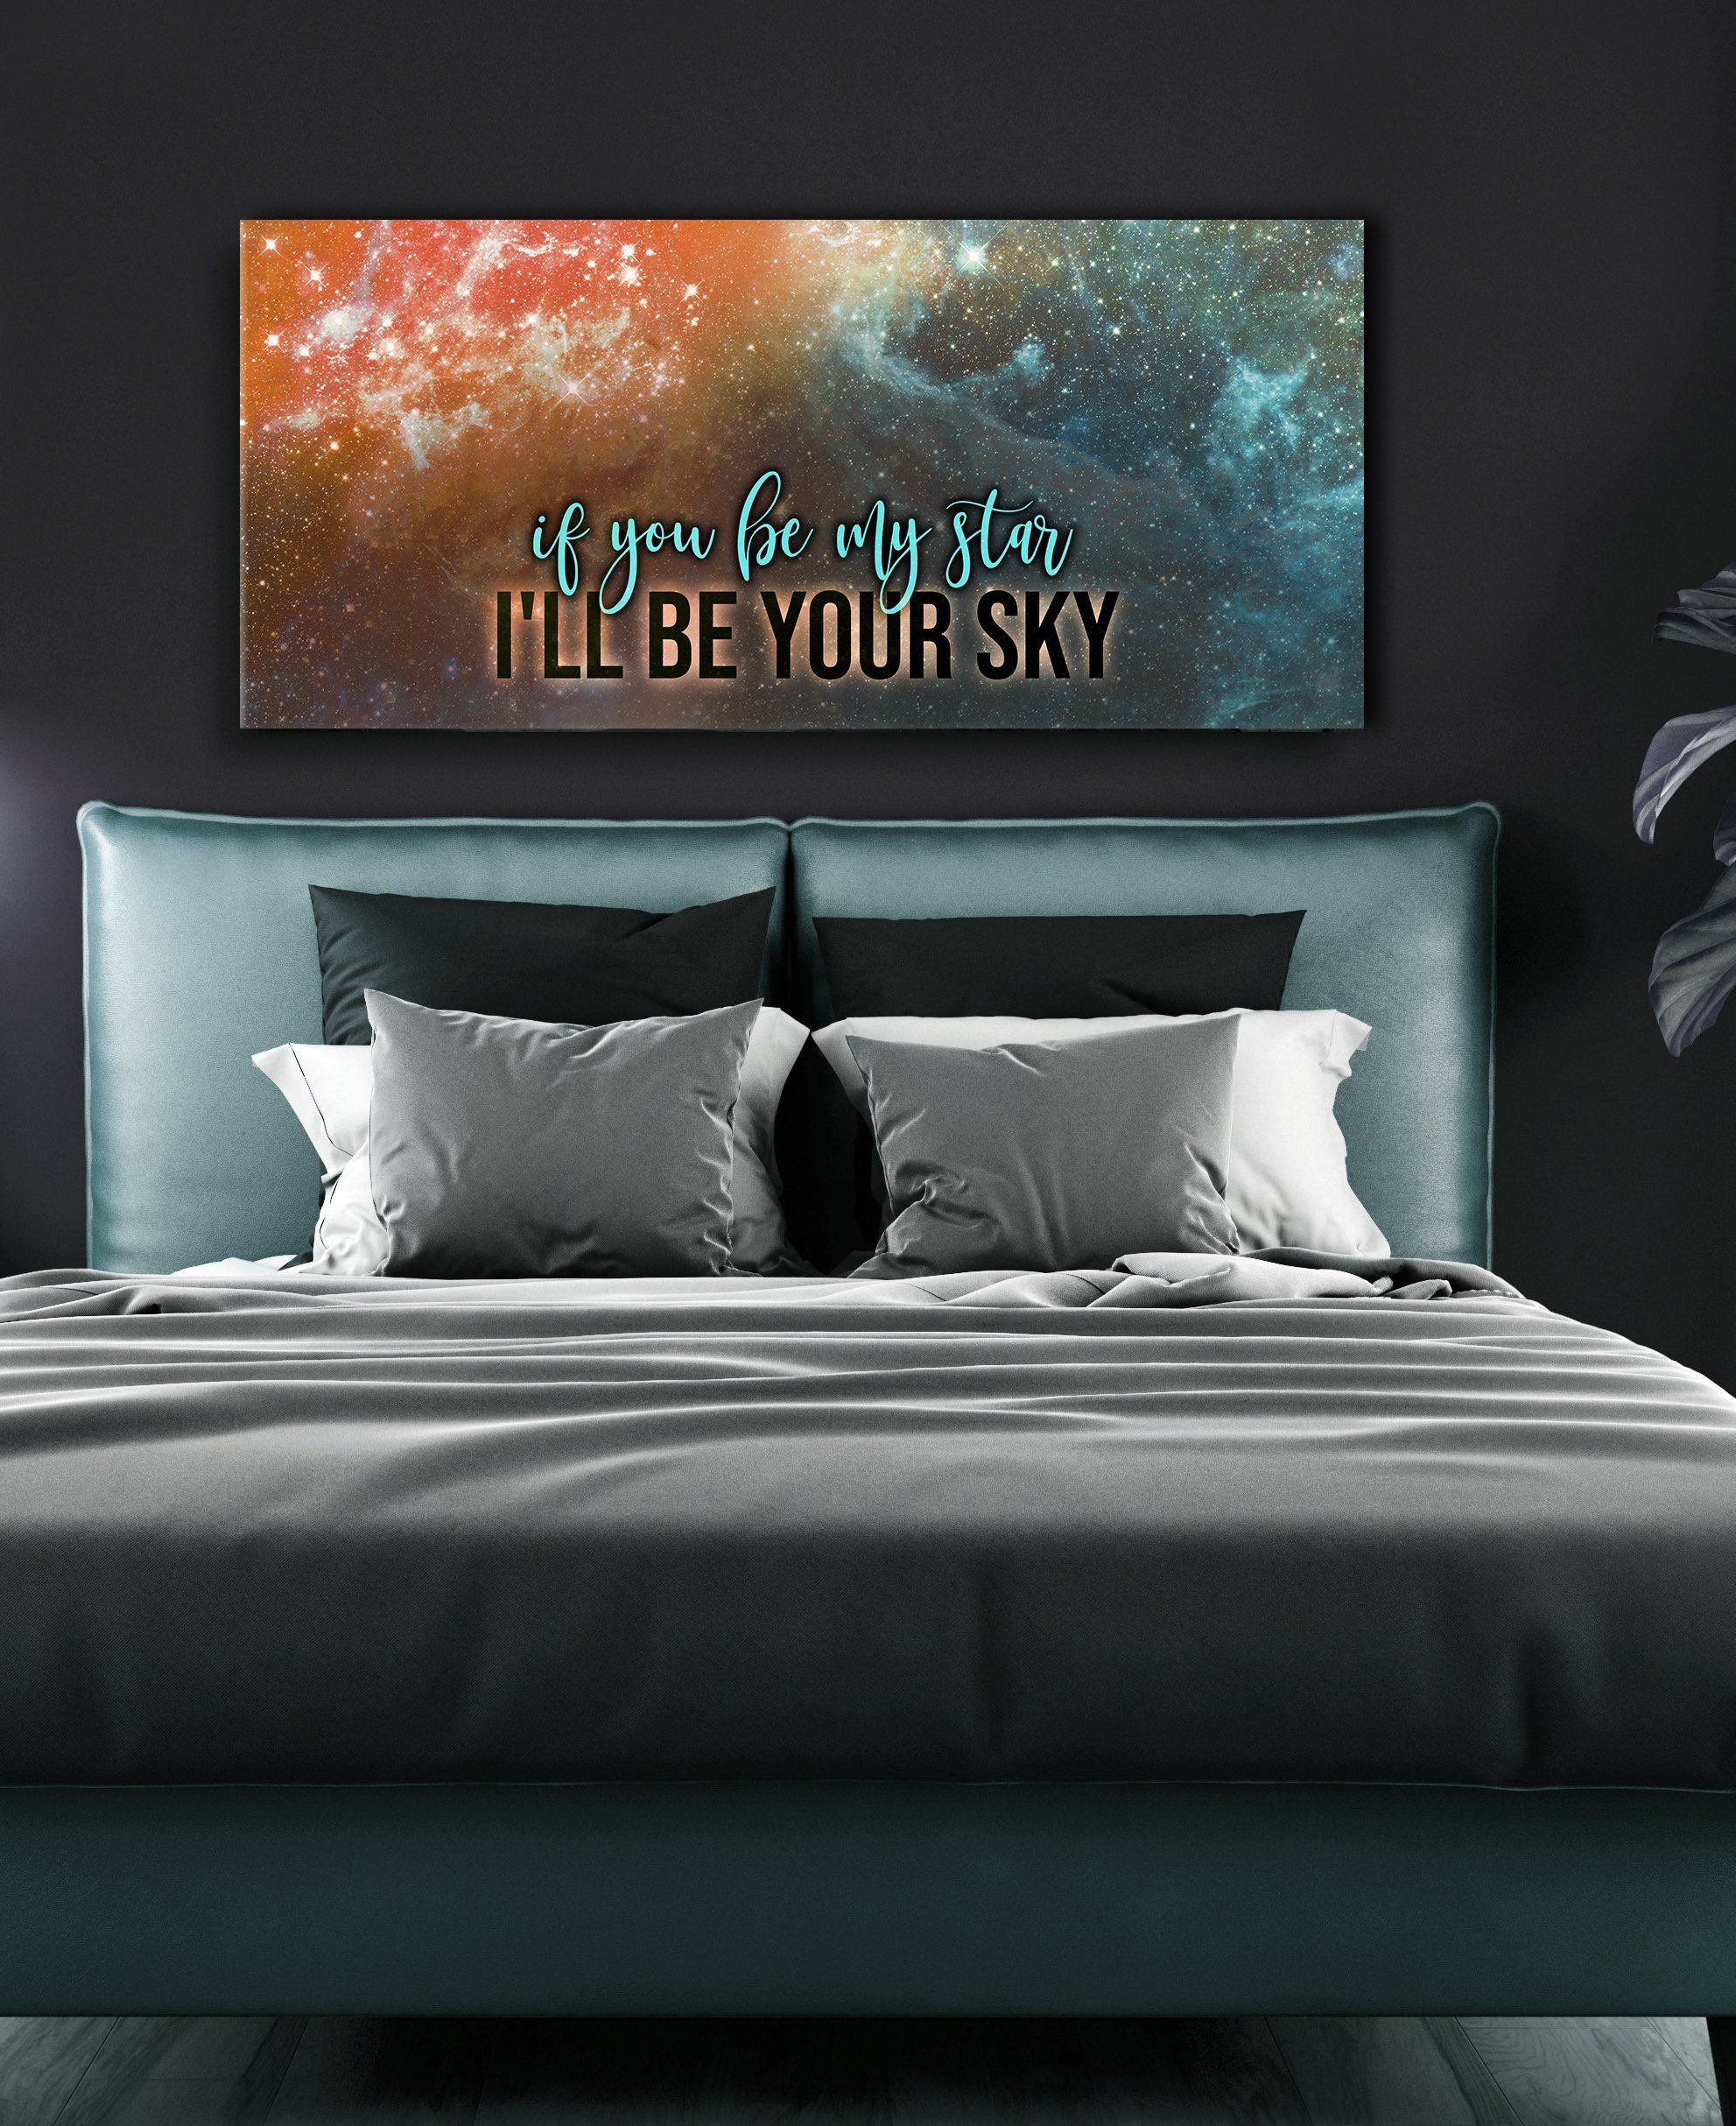 Signs for Bedroom Walls Fresh Bedroom Wall Art if You Be My Star Ill Be Your Sky Wood